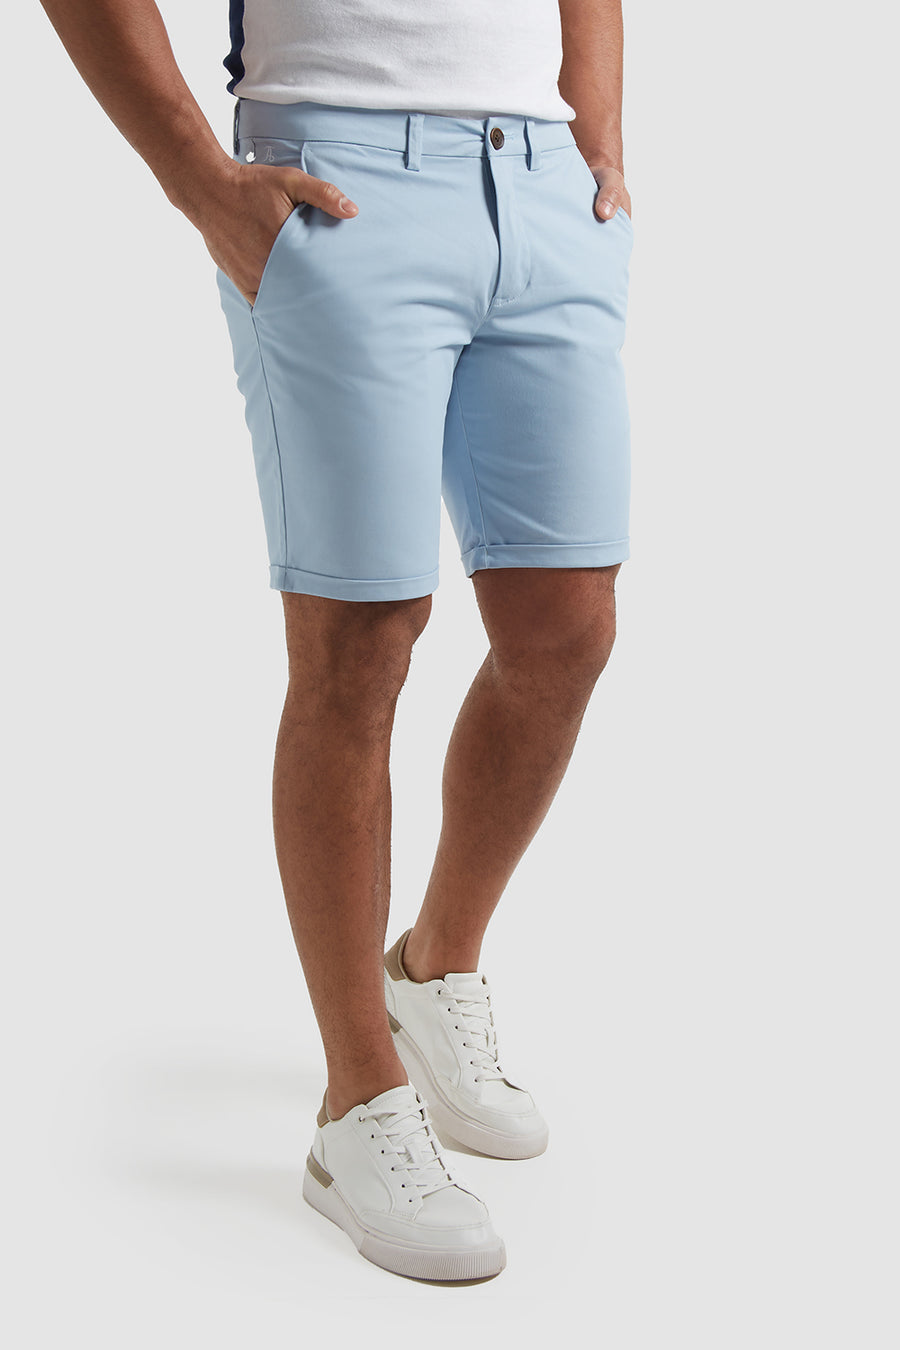 Athletic Fit Chino ATHLETE - TAILORED Shorts in - USA Navy